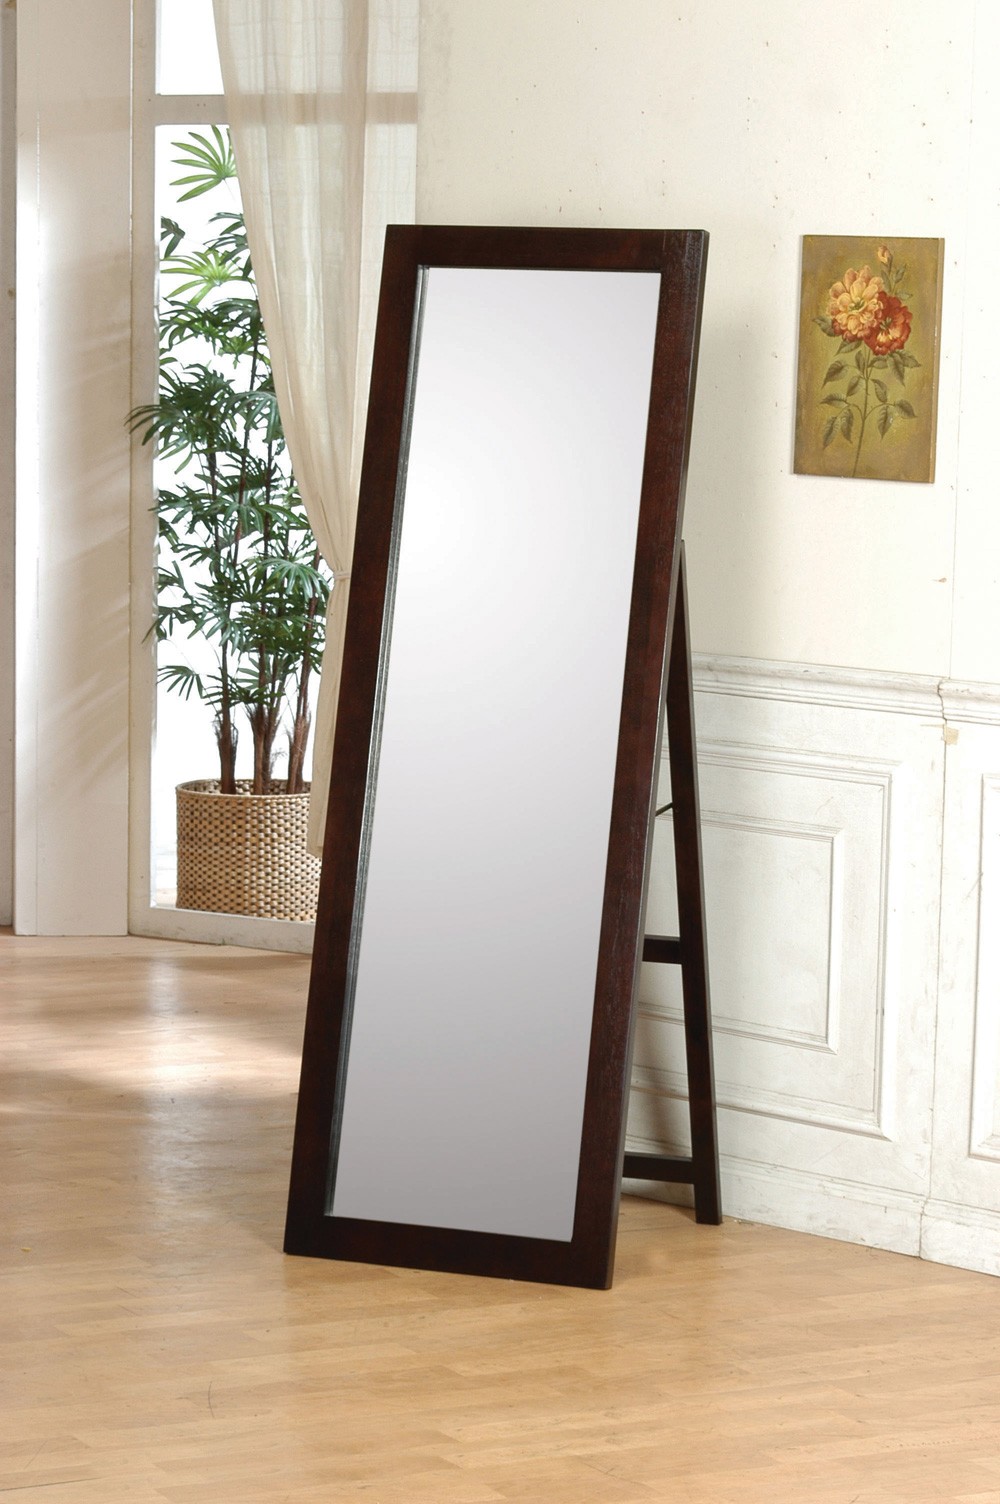 Types And Uses Of Floor Mirrors, How Tall Should A Leaning Mirror Be